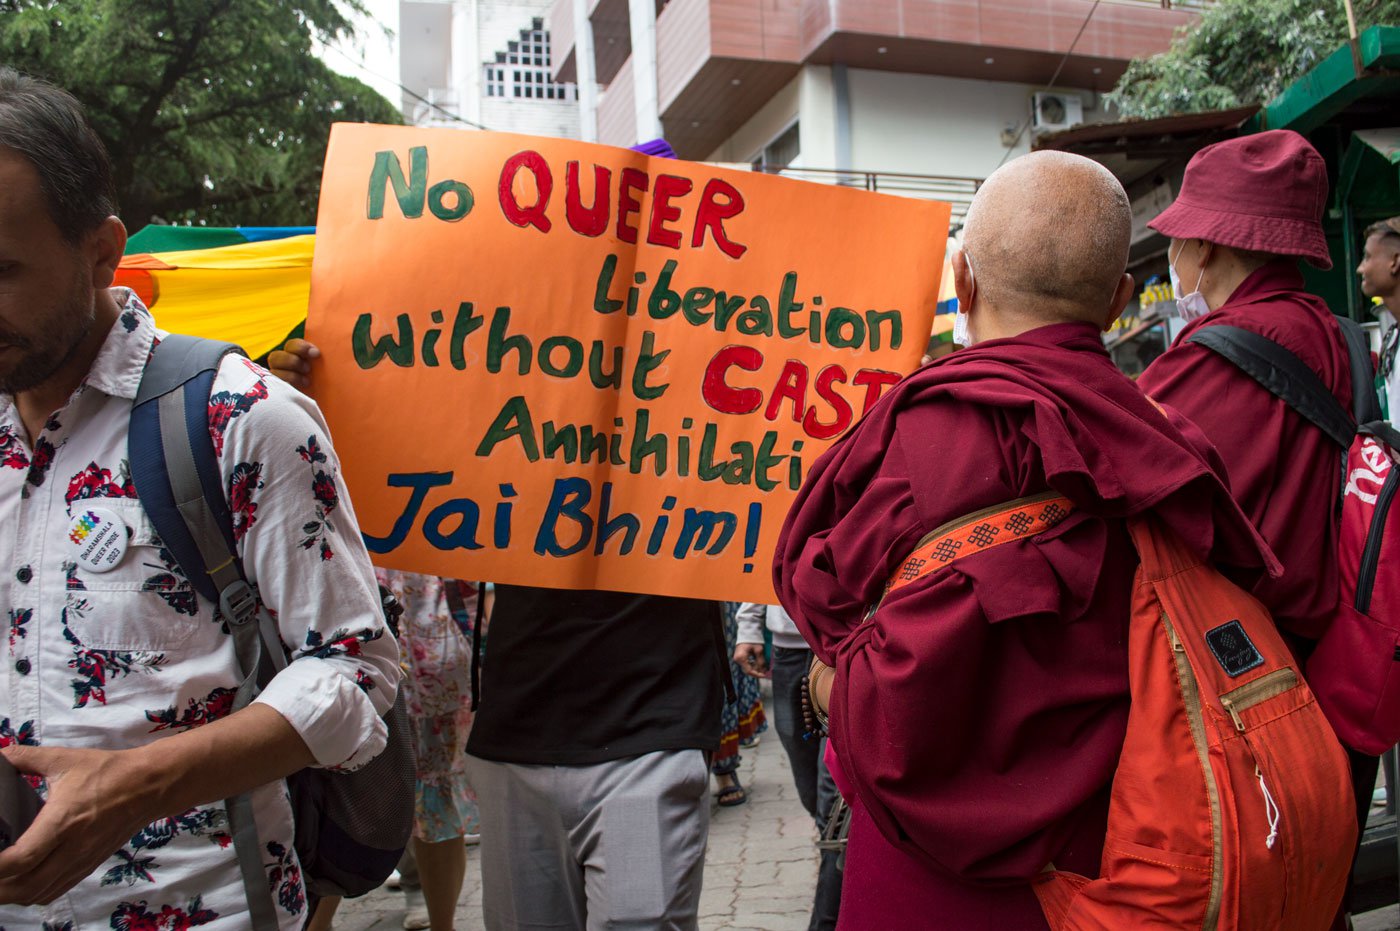 Organisers say that along with showing support for the queer community, they marched in solidarity against caste, class, landlessness and statelessness